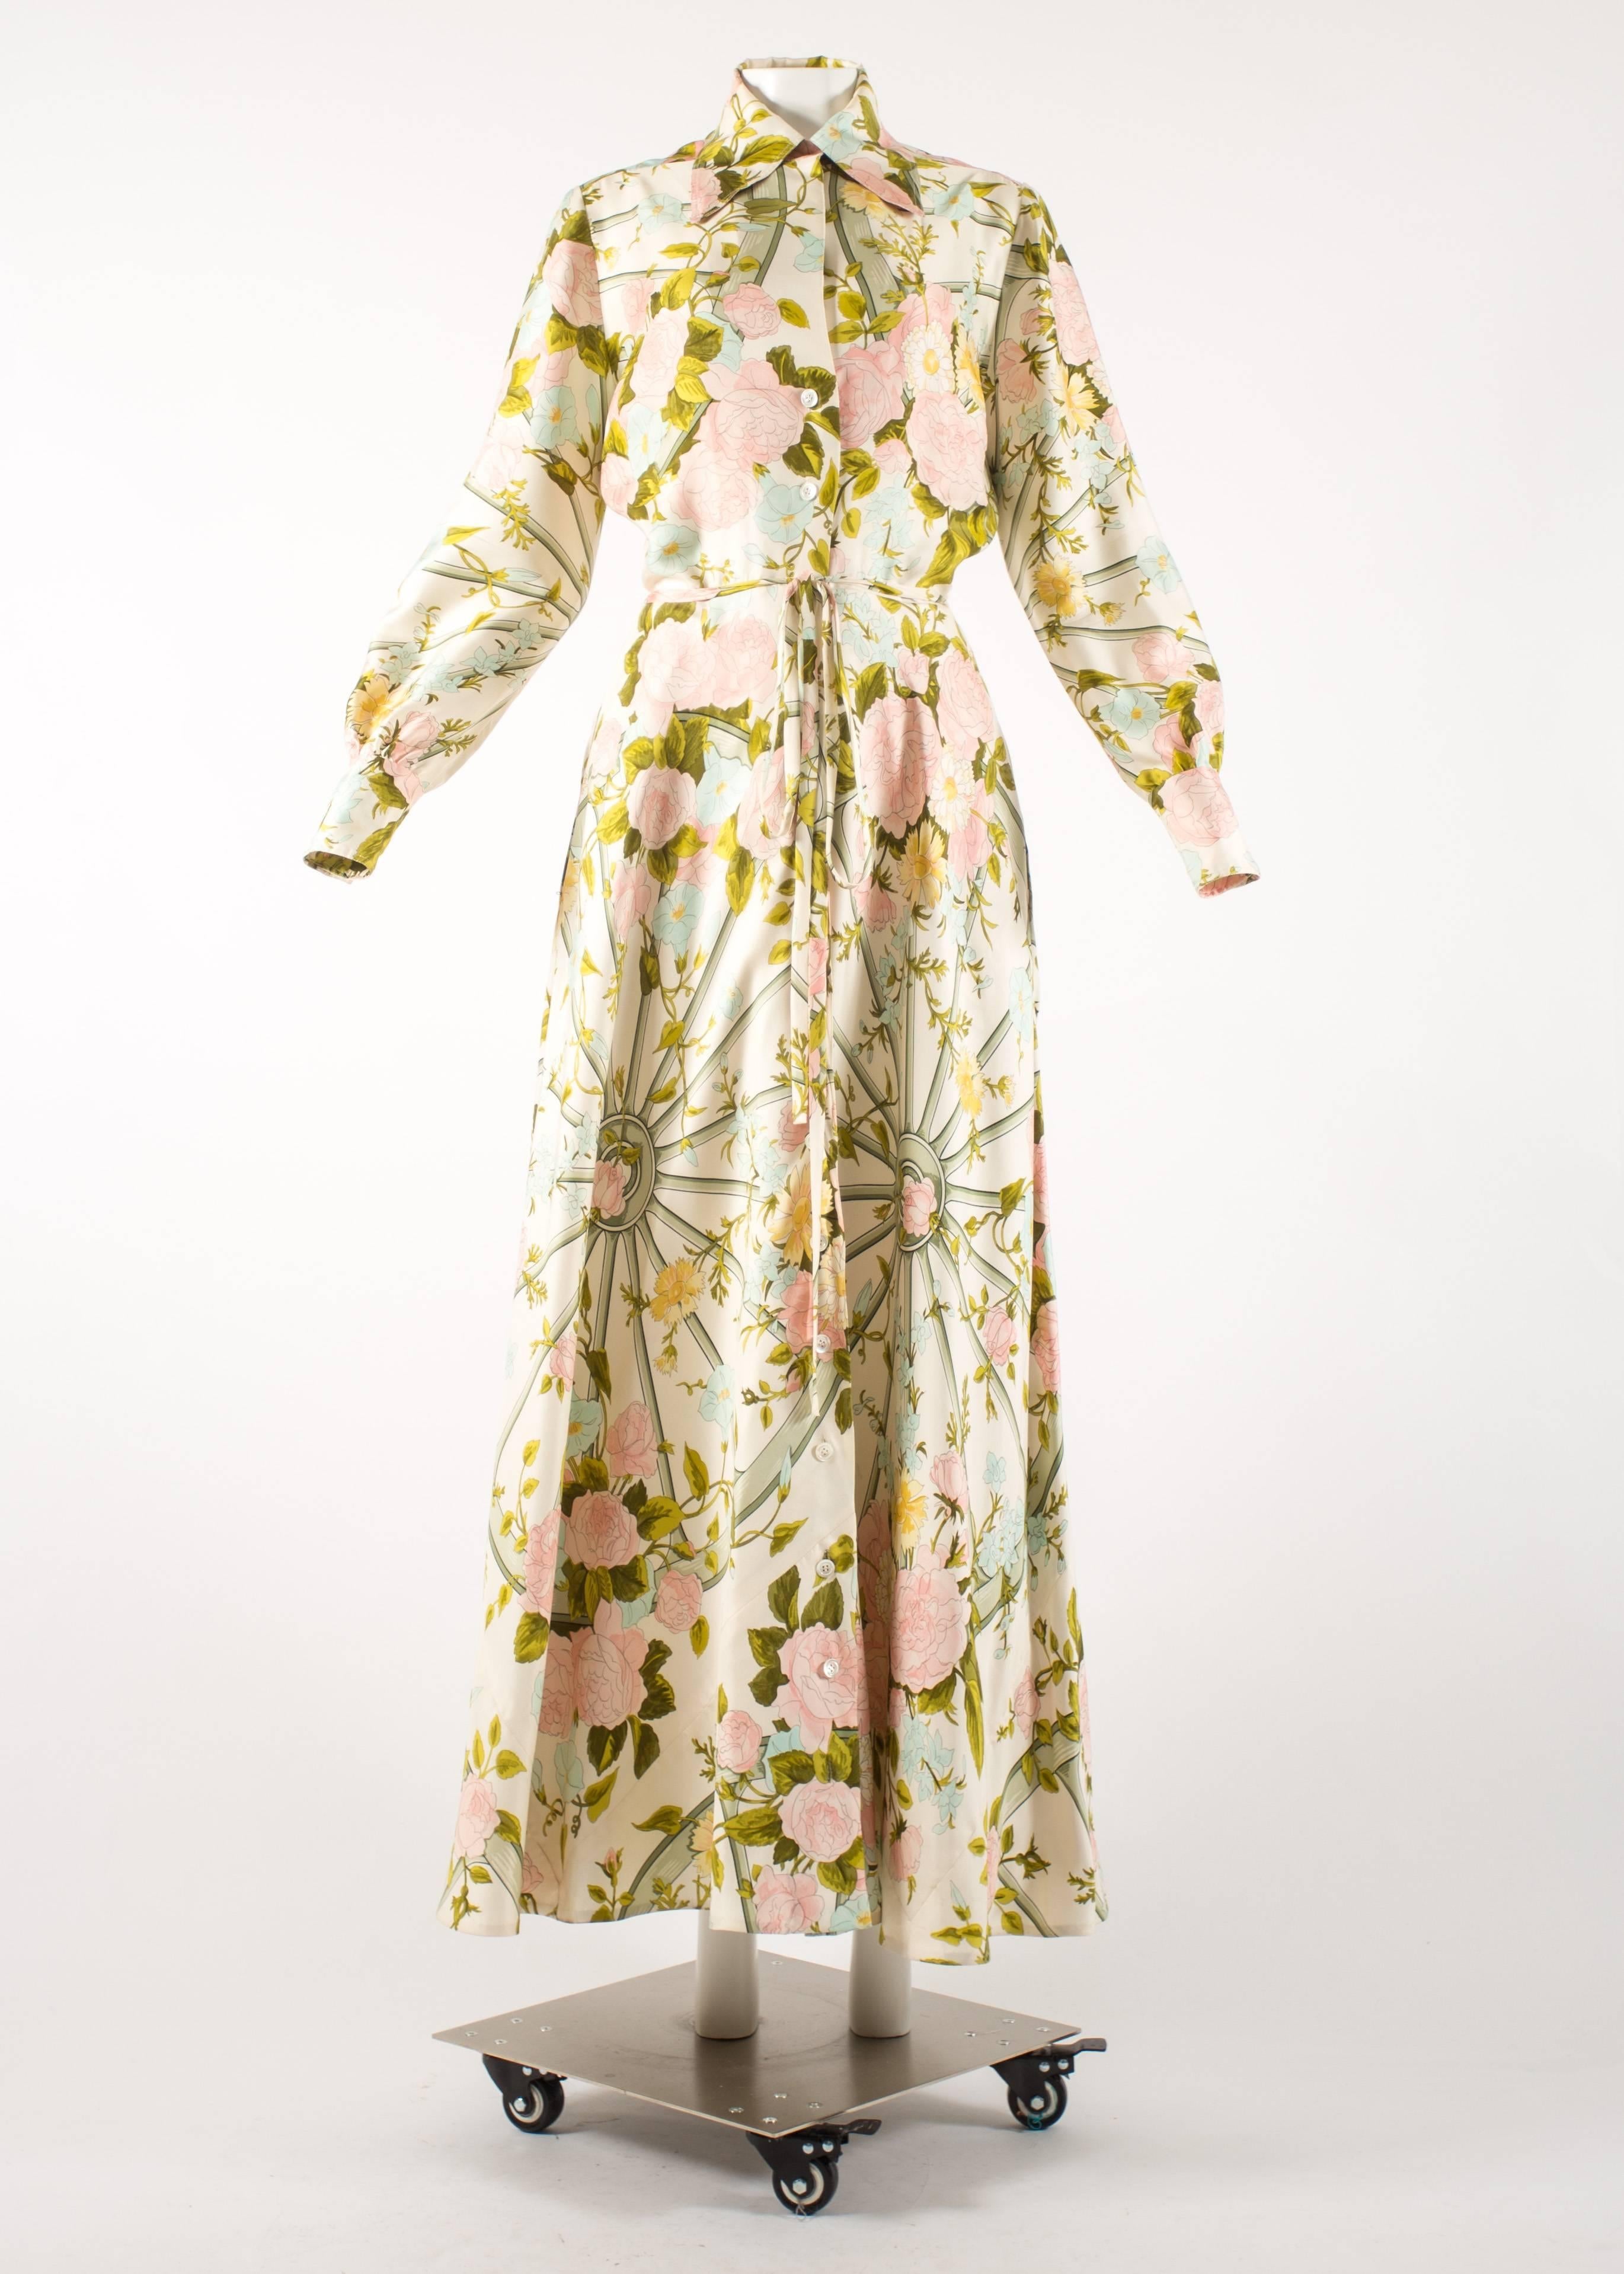 Hermes Paris 1970s 'Romantique' couture silk floral maxi dress 

- button fastenings throughout 
- bishop sleeves
- internal waist stay 
- 'Romantique' floral print 
- hand finished 
